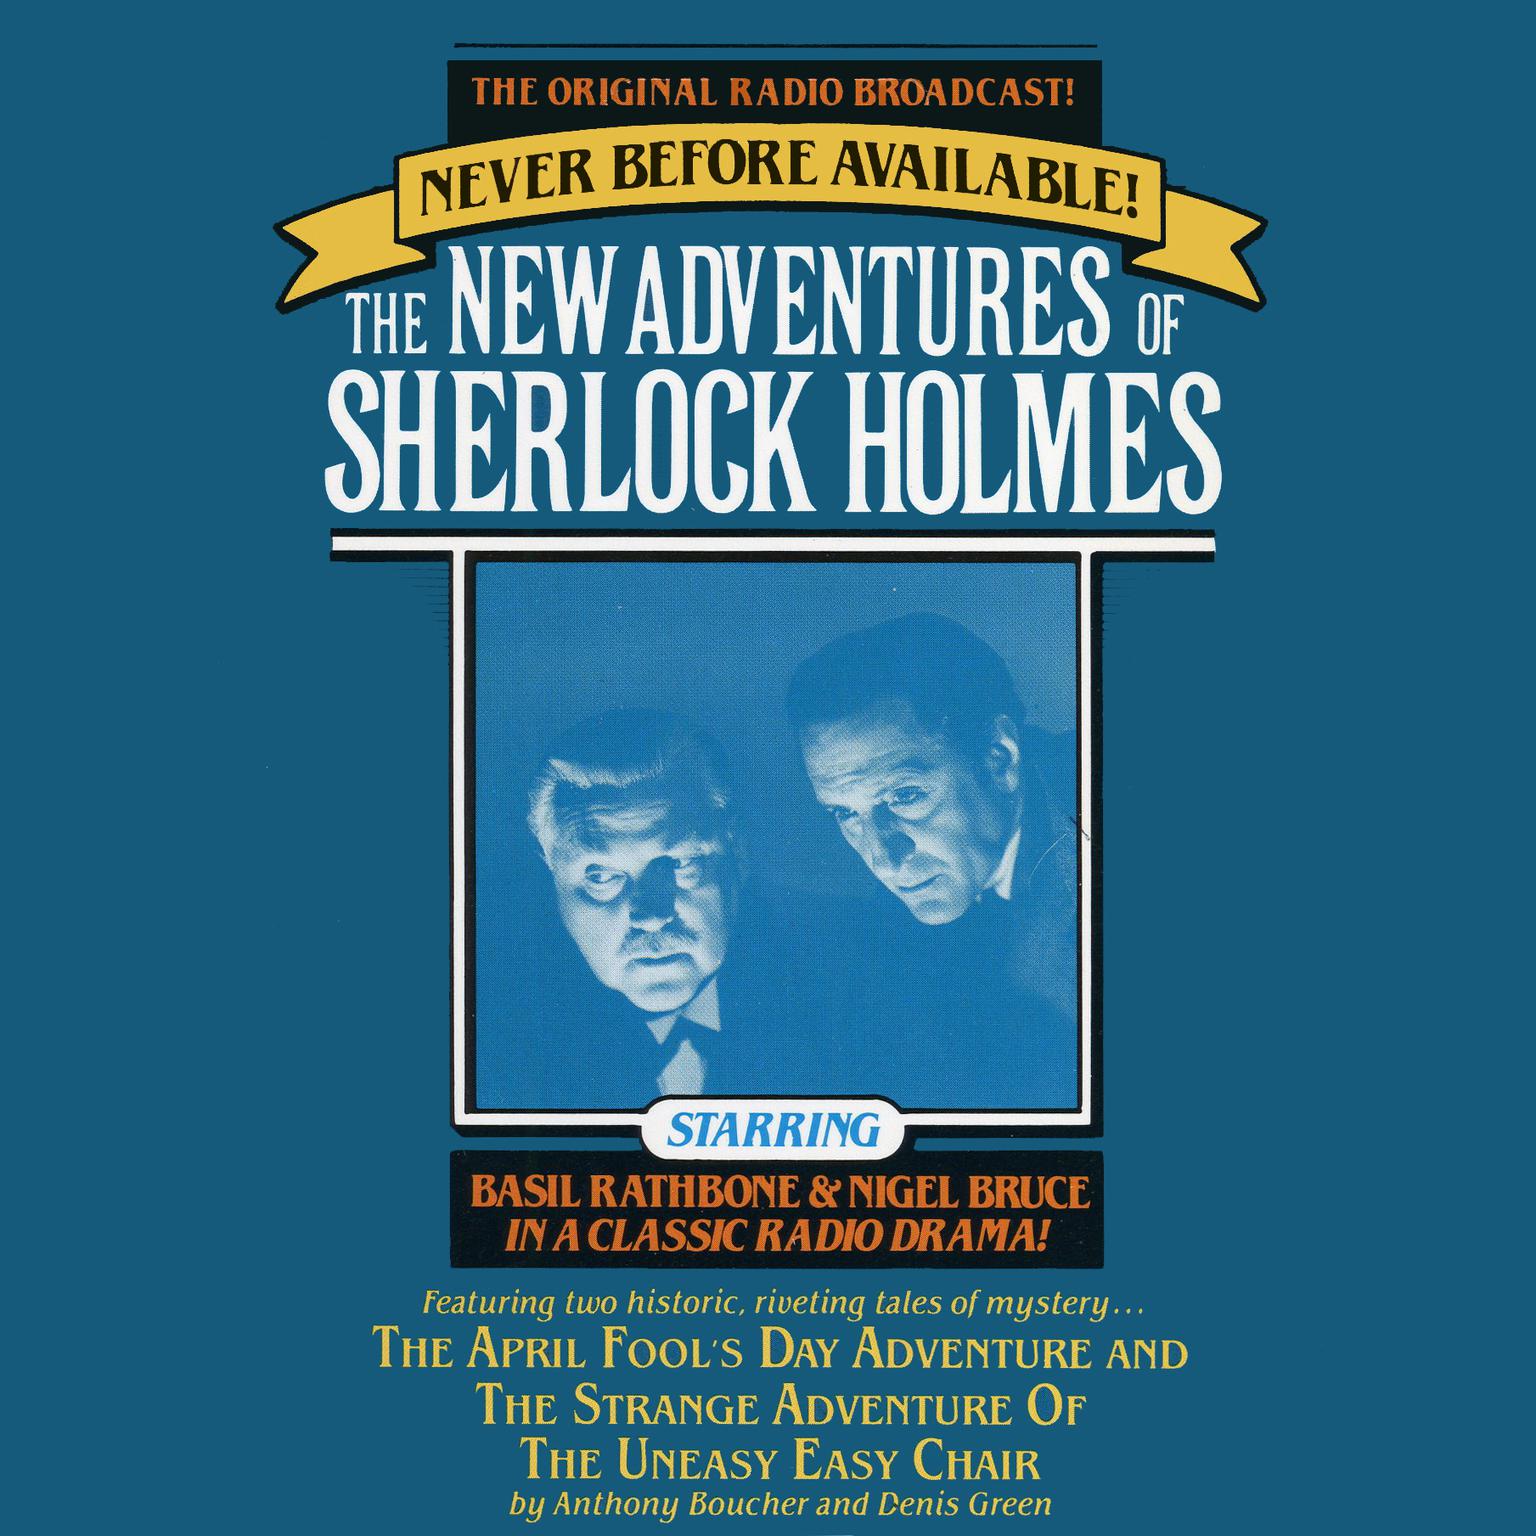 The April Fool’s Day Adventure and The Strange Adventure of the Uneasy Easy Chair (Abridged): The New Adventures of Sherlock Holmes, Episode 3 Audiobook, by Anthony Boucher